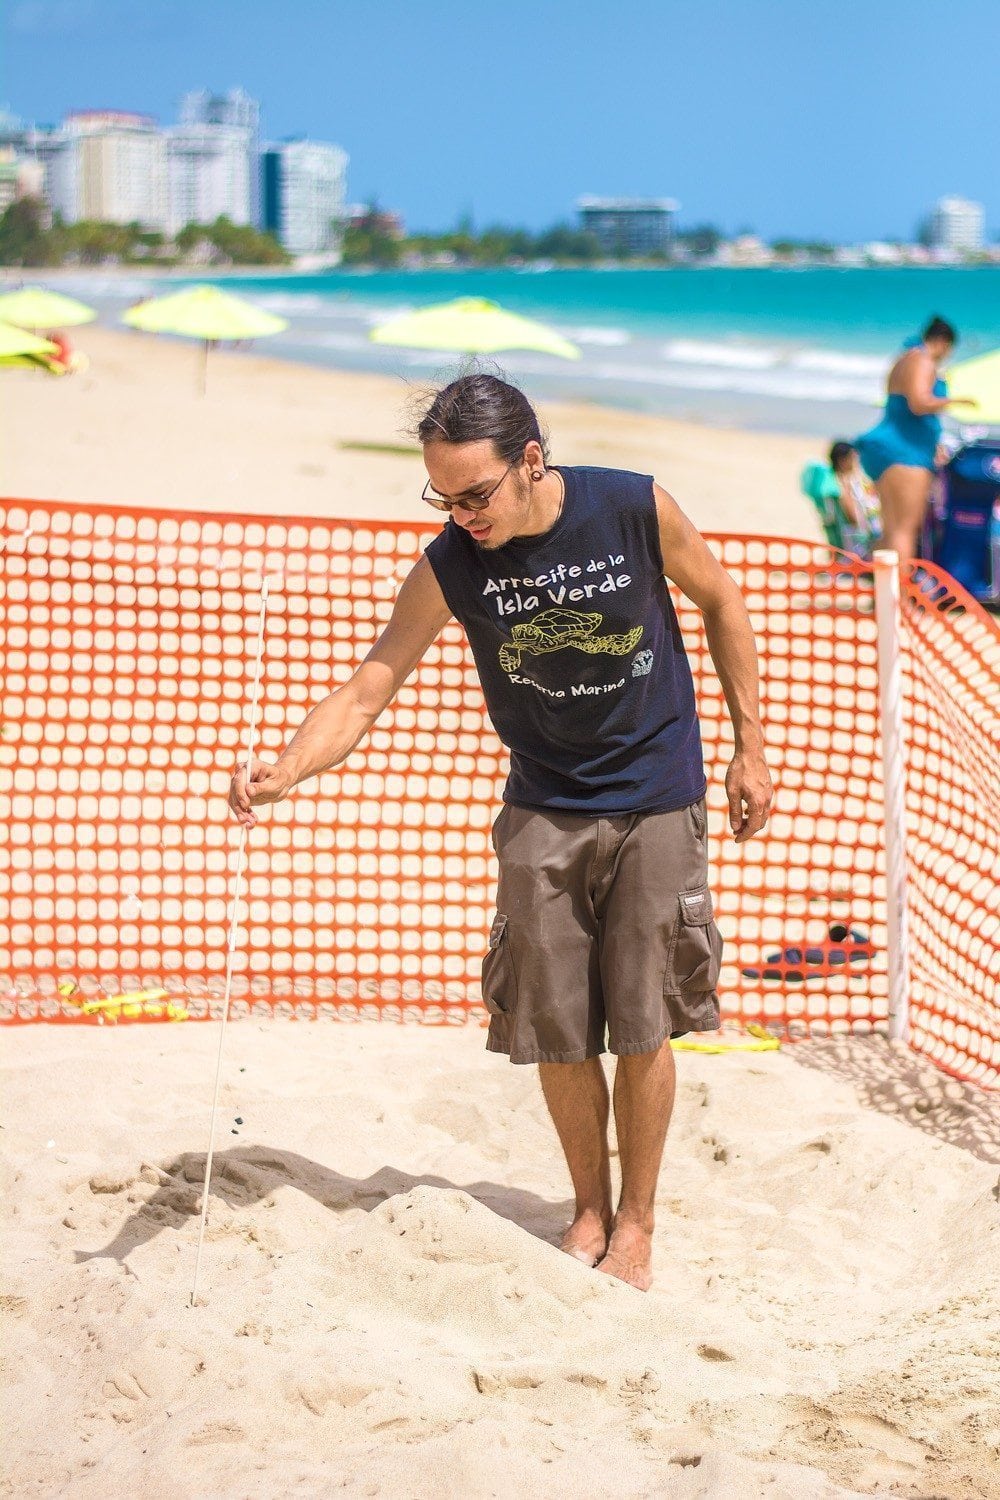 Diego prodding to make sure they are protecting the complete turtle nest. 